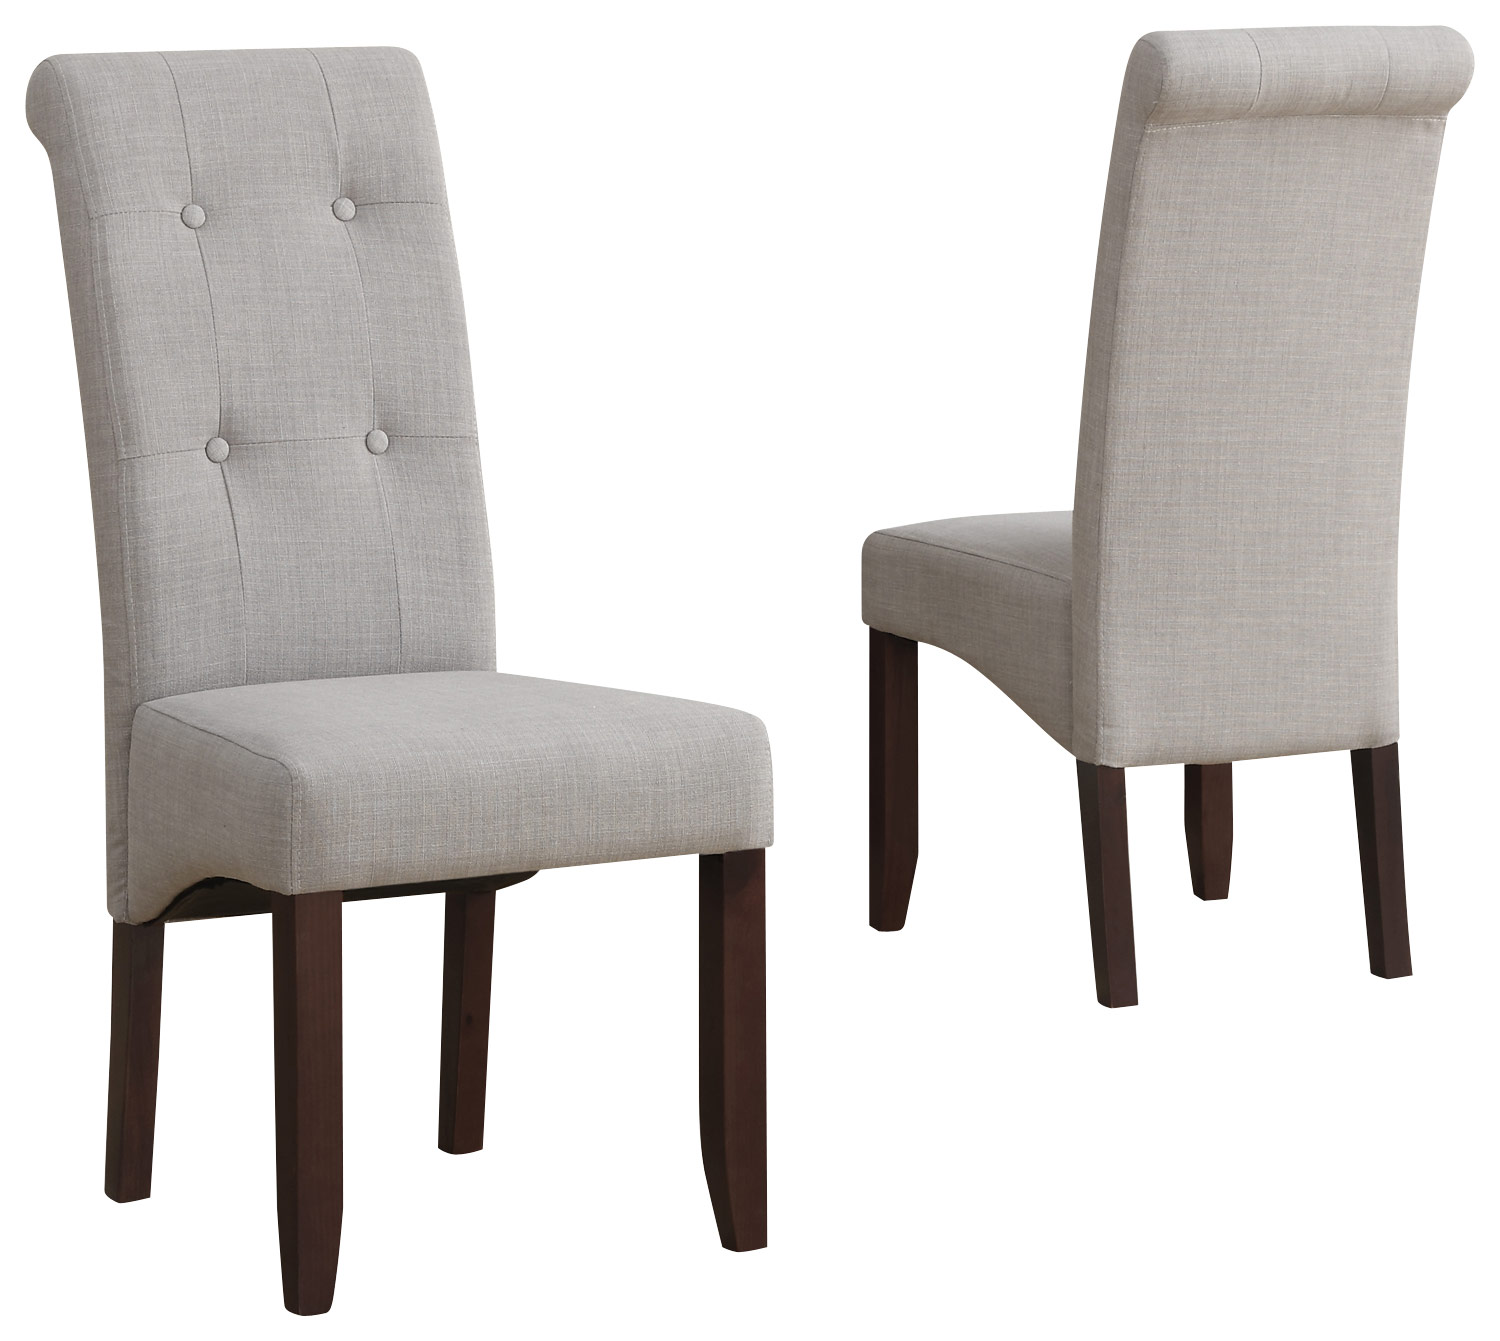 Simpli Home - Cosmopolitan Parson Chairs (Pair) - Dove Gray was $253.99 now $199.99 (21.0% off)